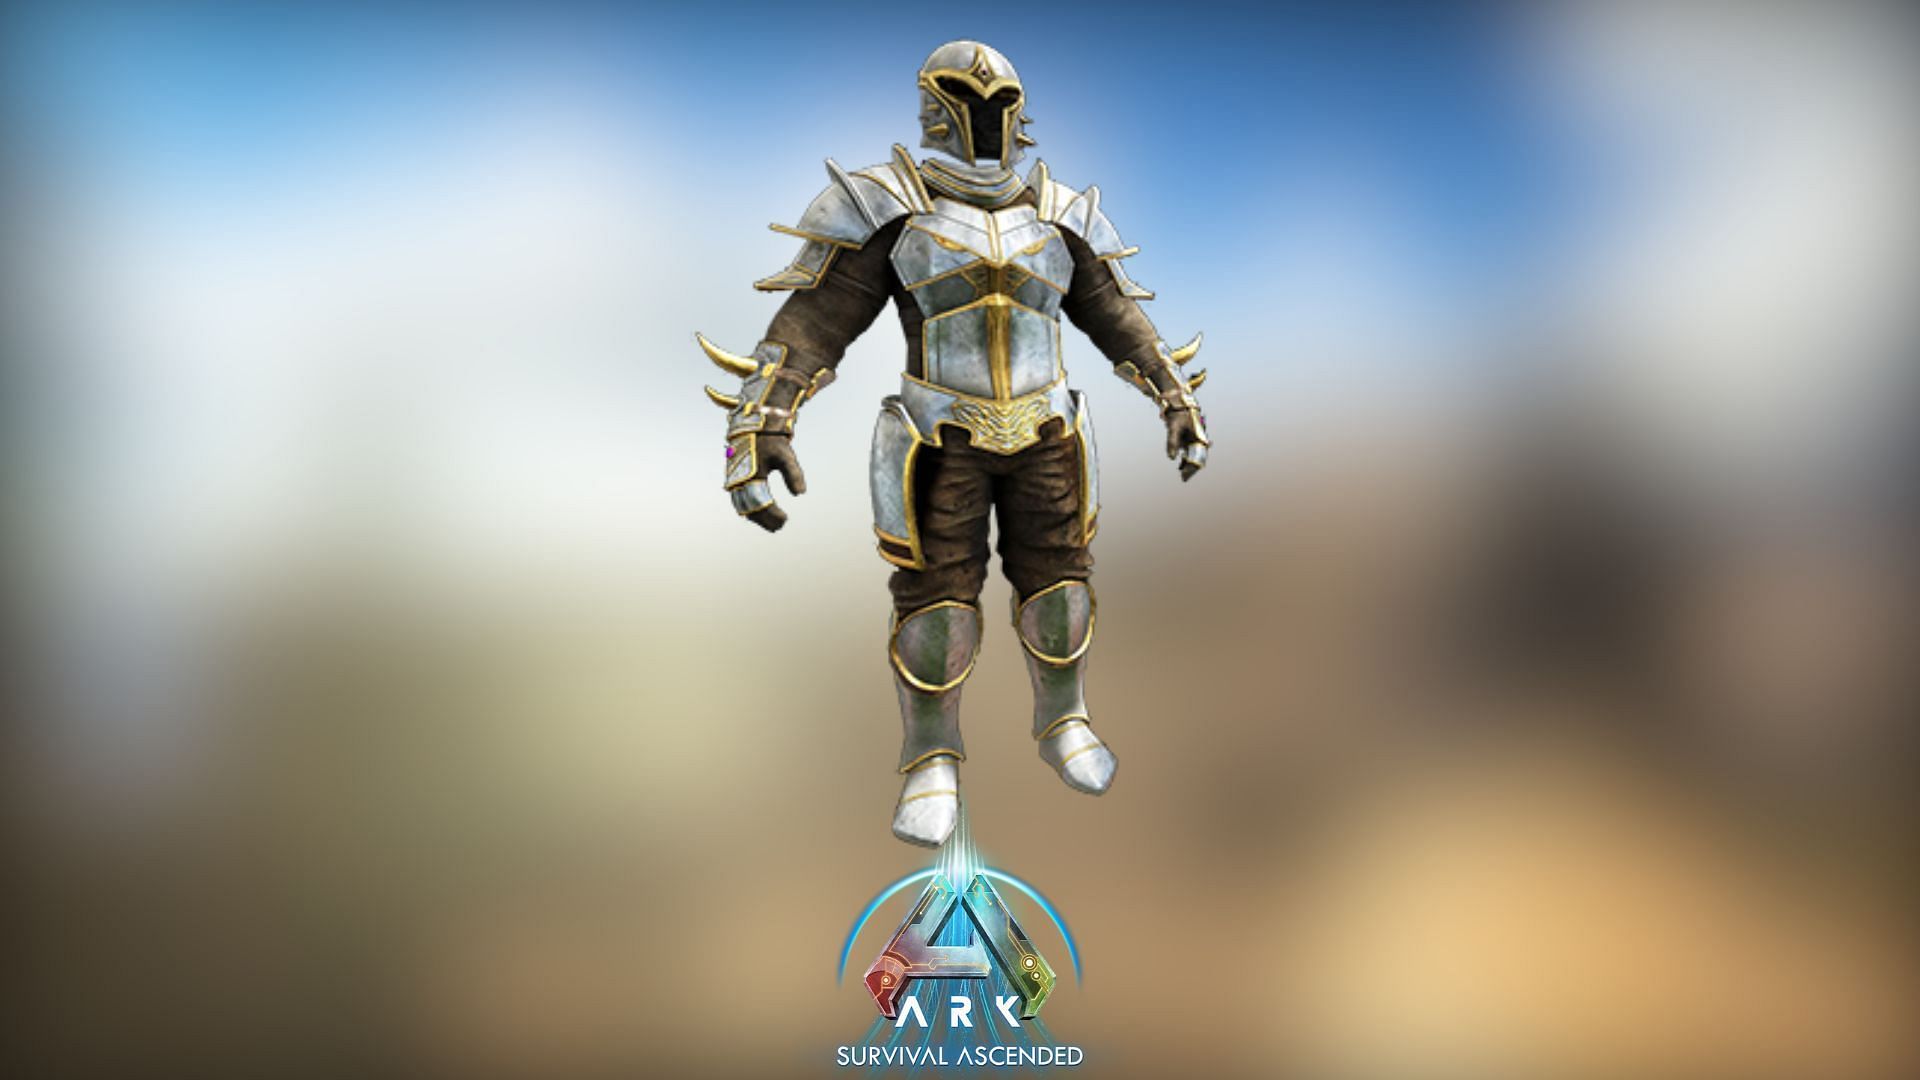 Maticore armor set in Ark Survival Ascended: Scorched Earth